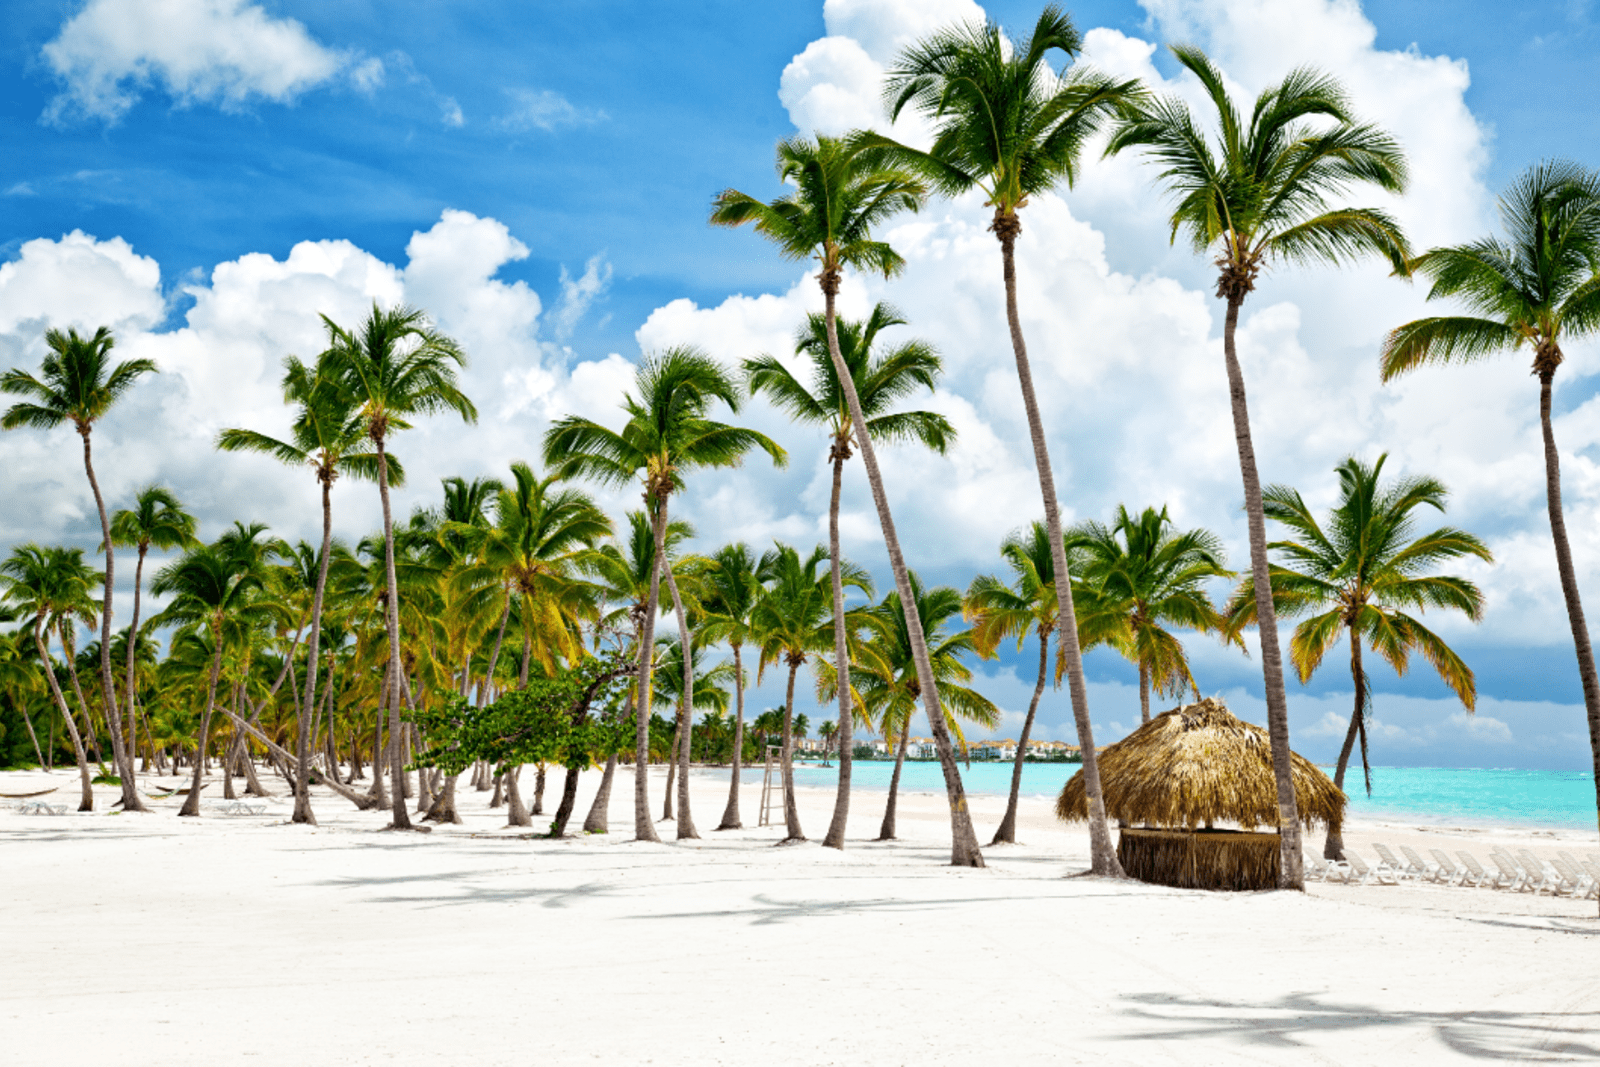 Palm trees on a beach in the Dominican Republic